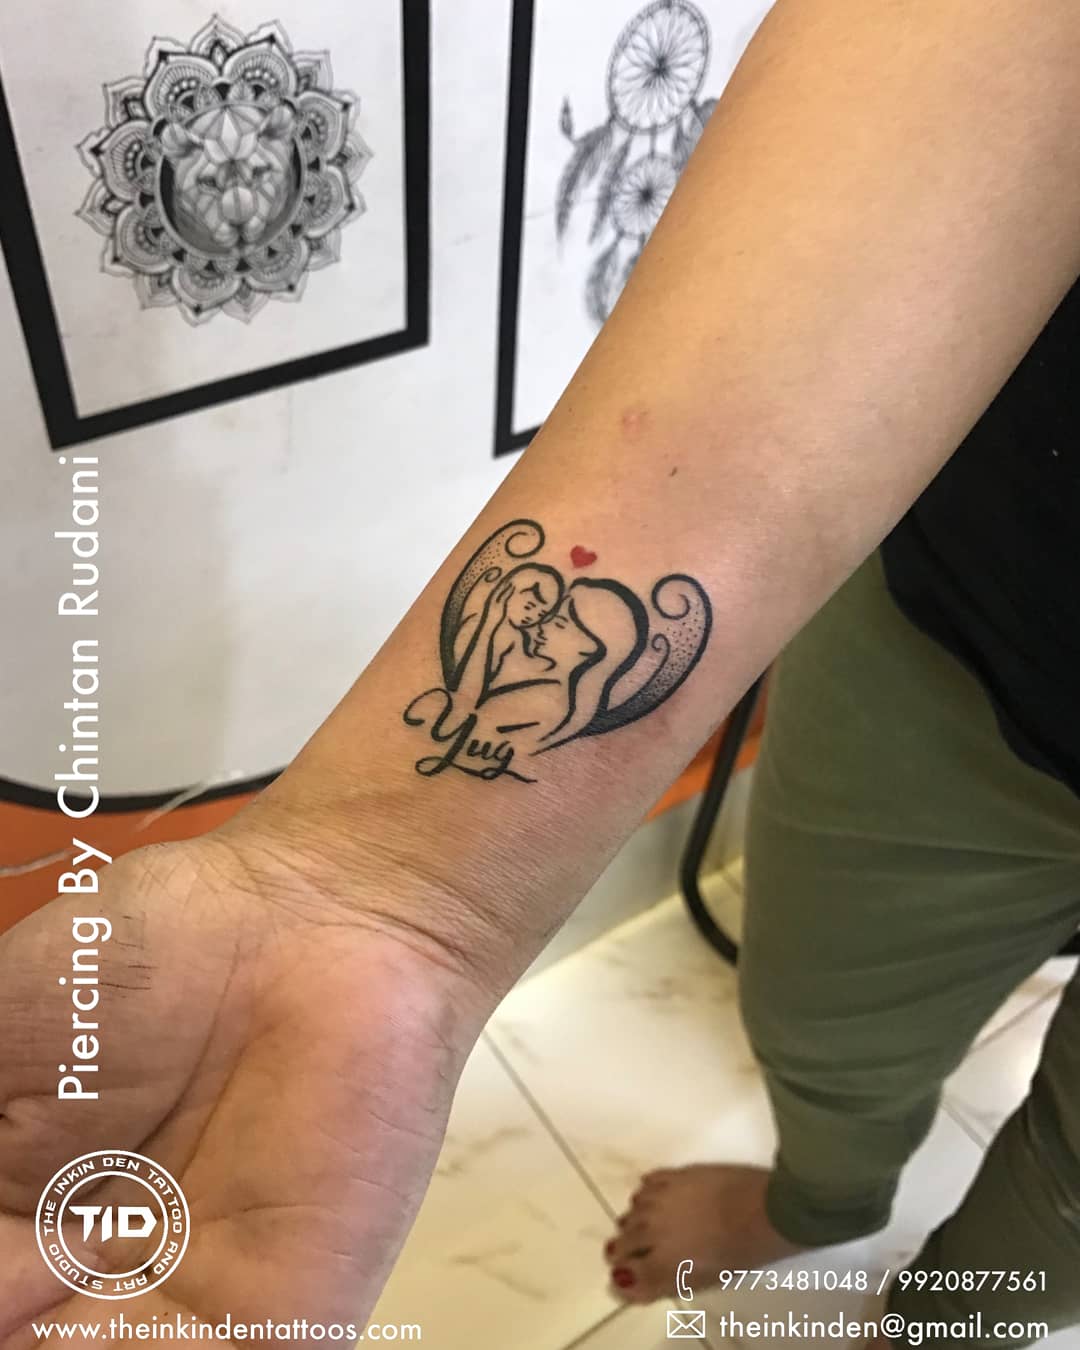 maa tattoo tattoo for mother mother son tattoo by anurag chouhan tattoo  nasha  Tattoo for son Mother tattoos Mother son tattoos